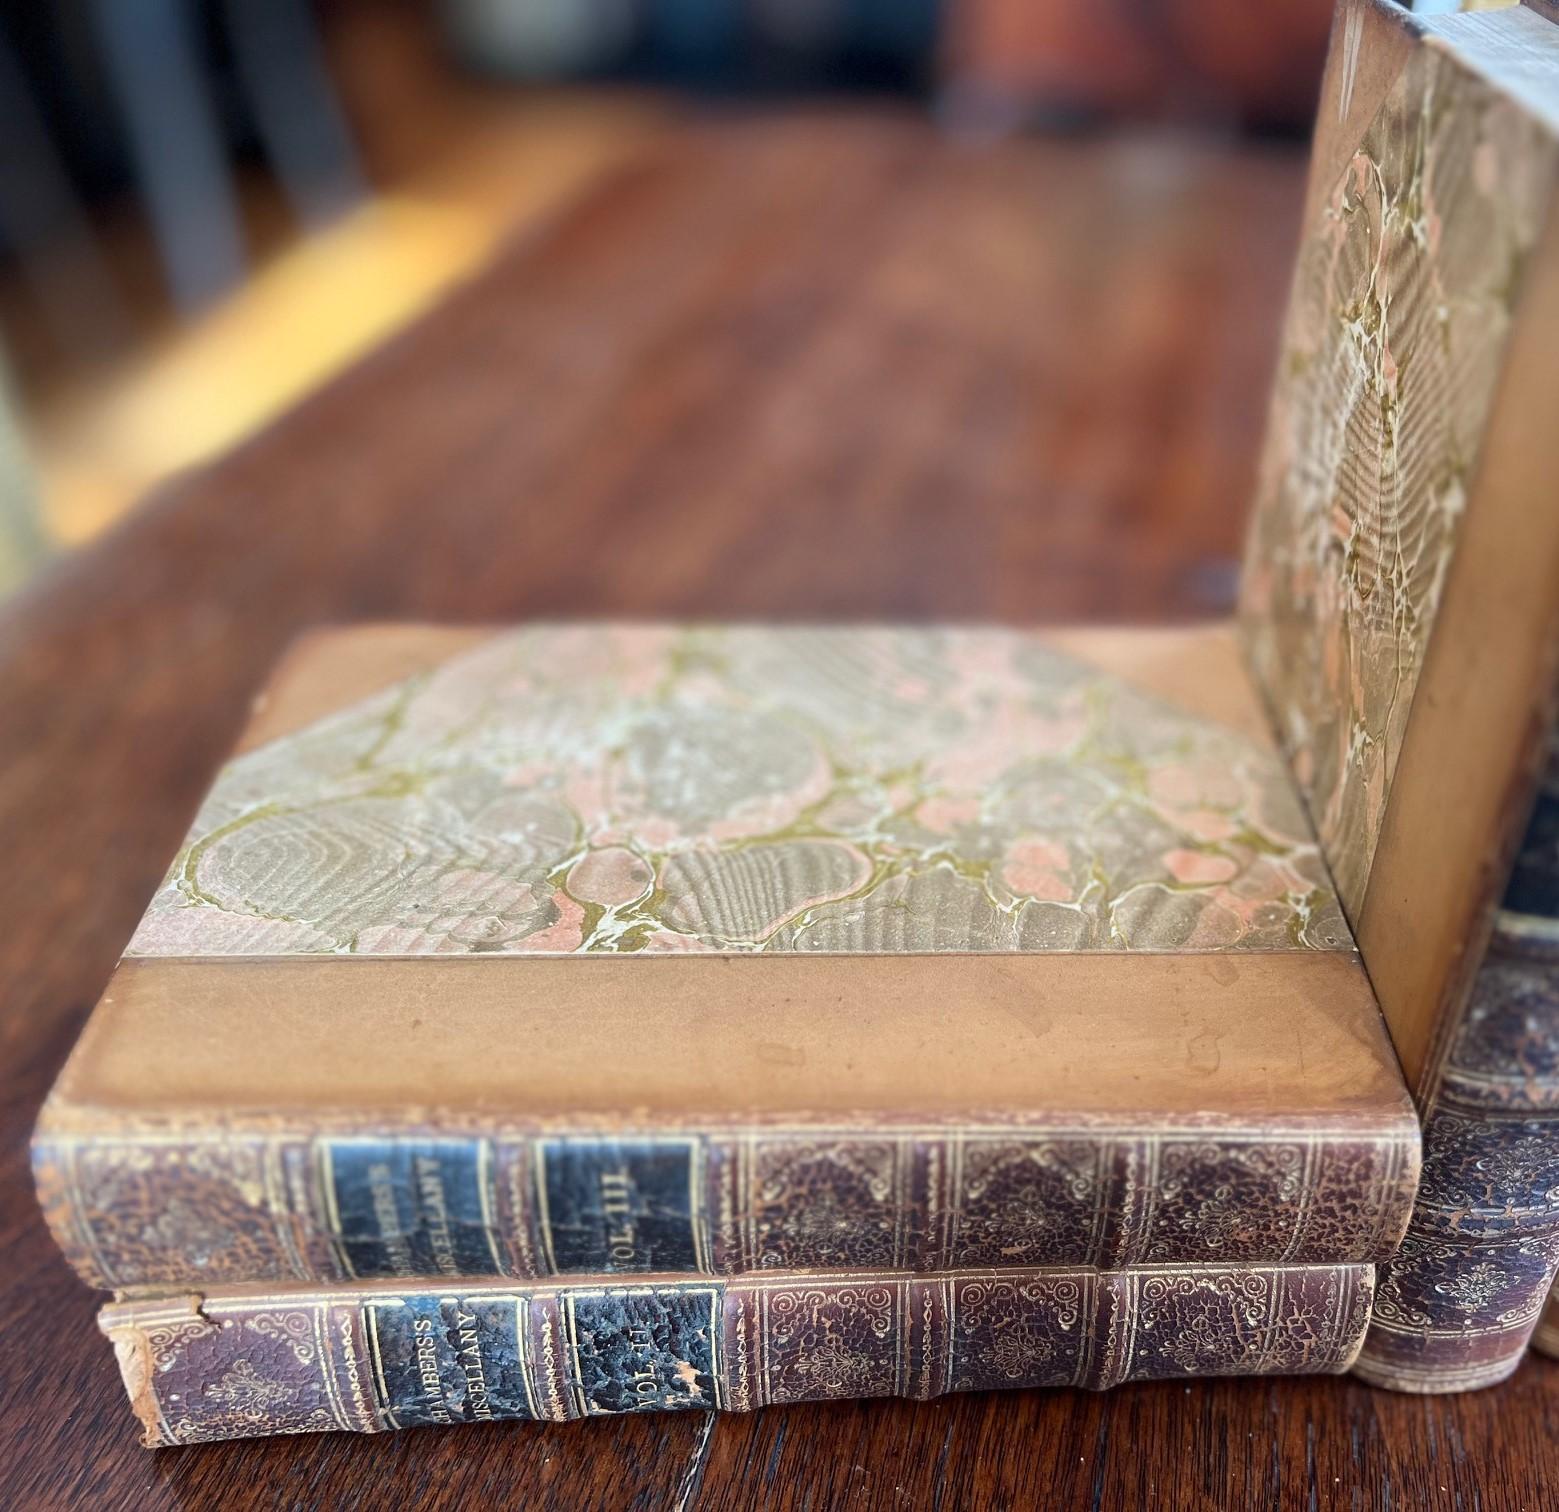 1872 Chambers's Miscellany of Instructive and Entertaining Tracts - 8 Volumes In Fair Condition For Sale In Morristown, NJ